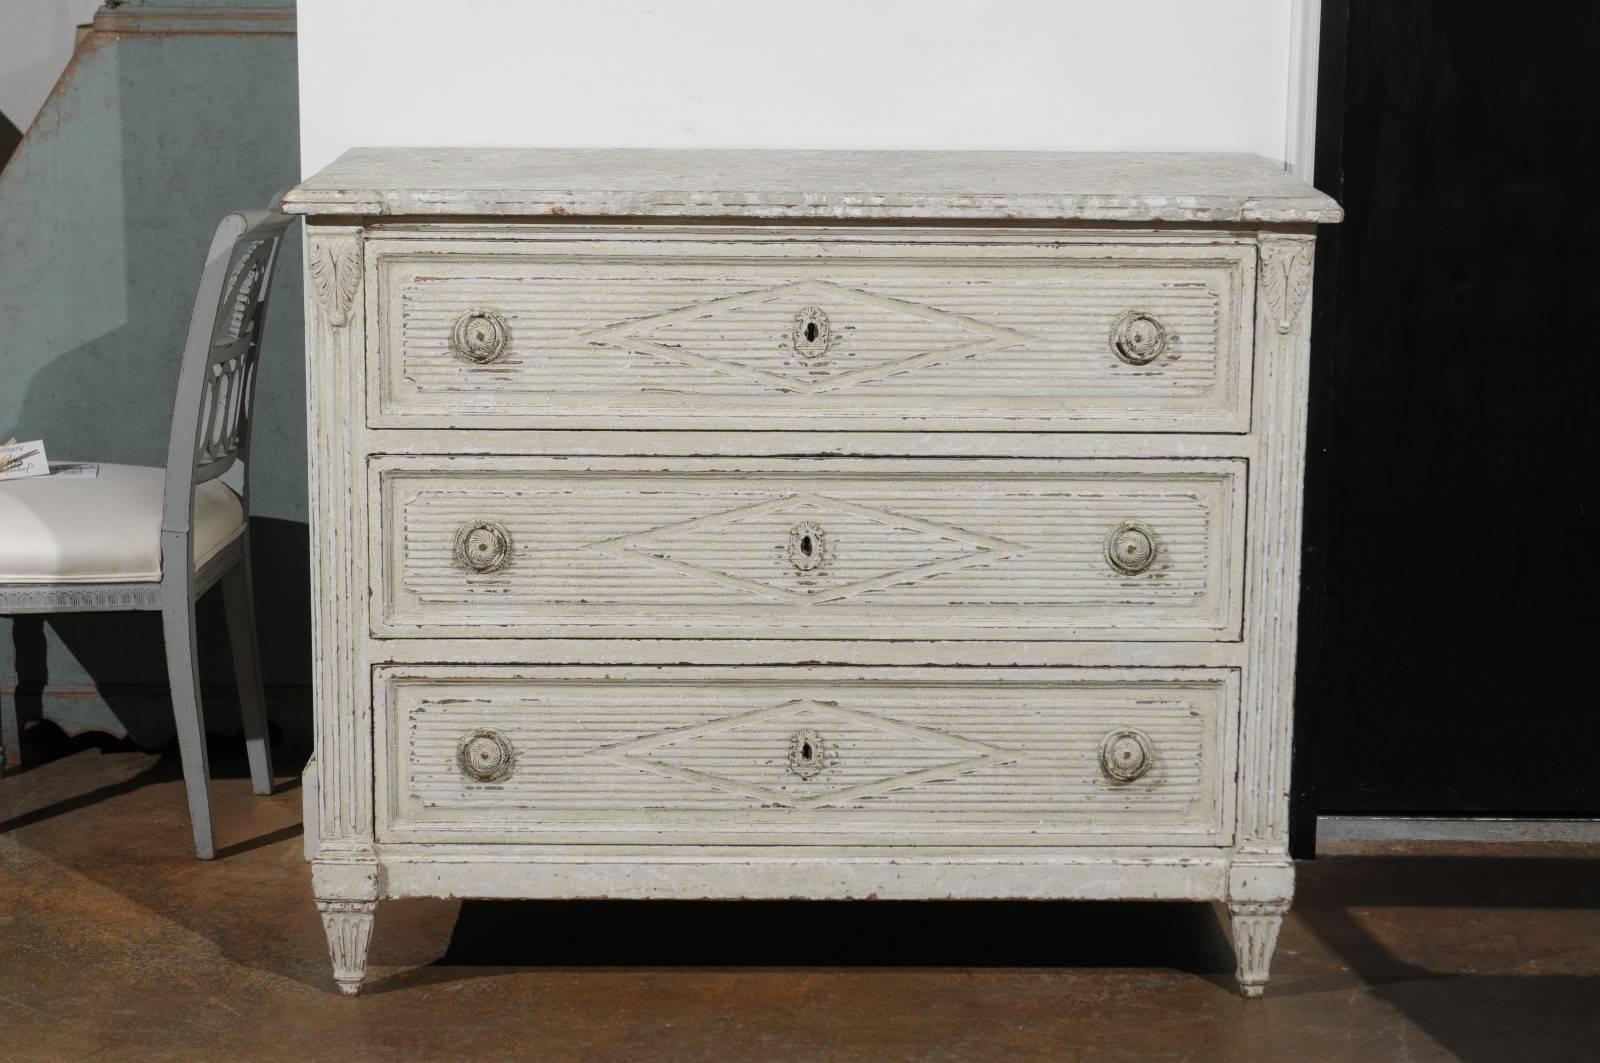 A late 18th century Danish neoclassical three-drawer commode with reeded decor and diamond motifs. Born in Denmark during the later years of the 18th century, this painted wood commode features a rectangular top with slightly protruding corners